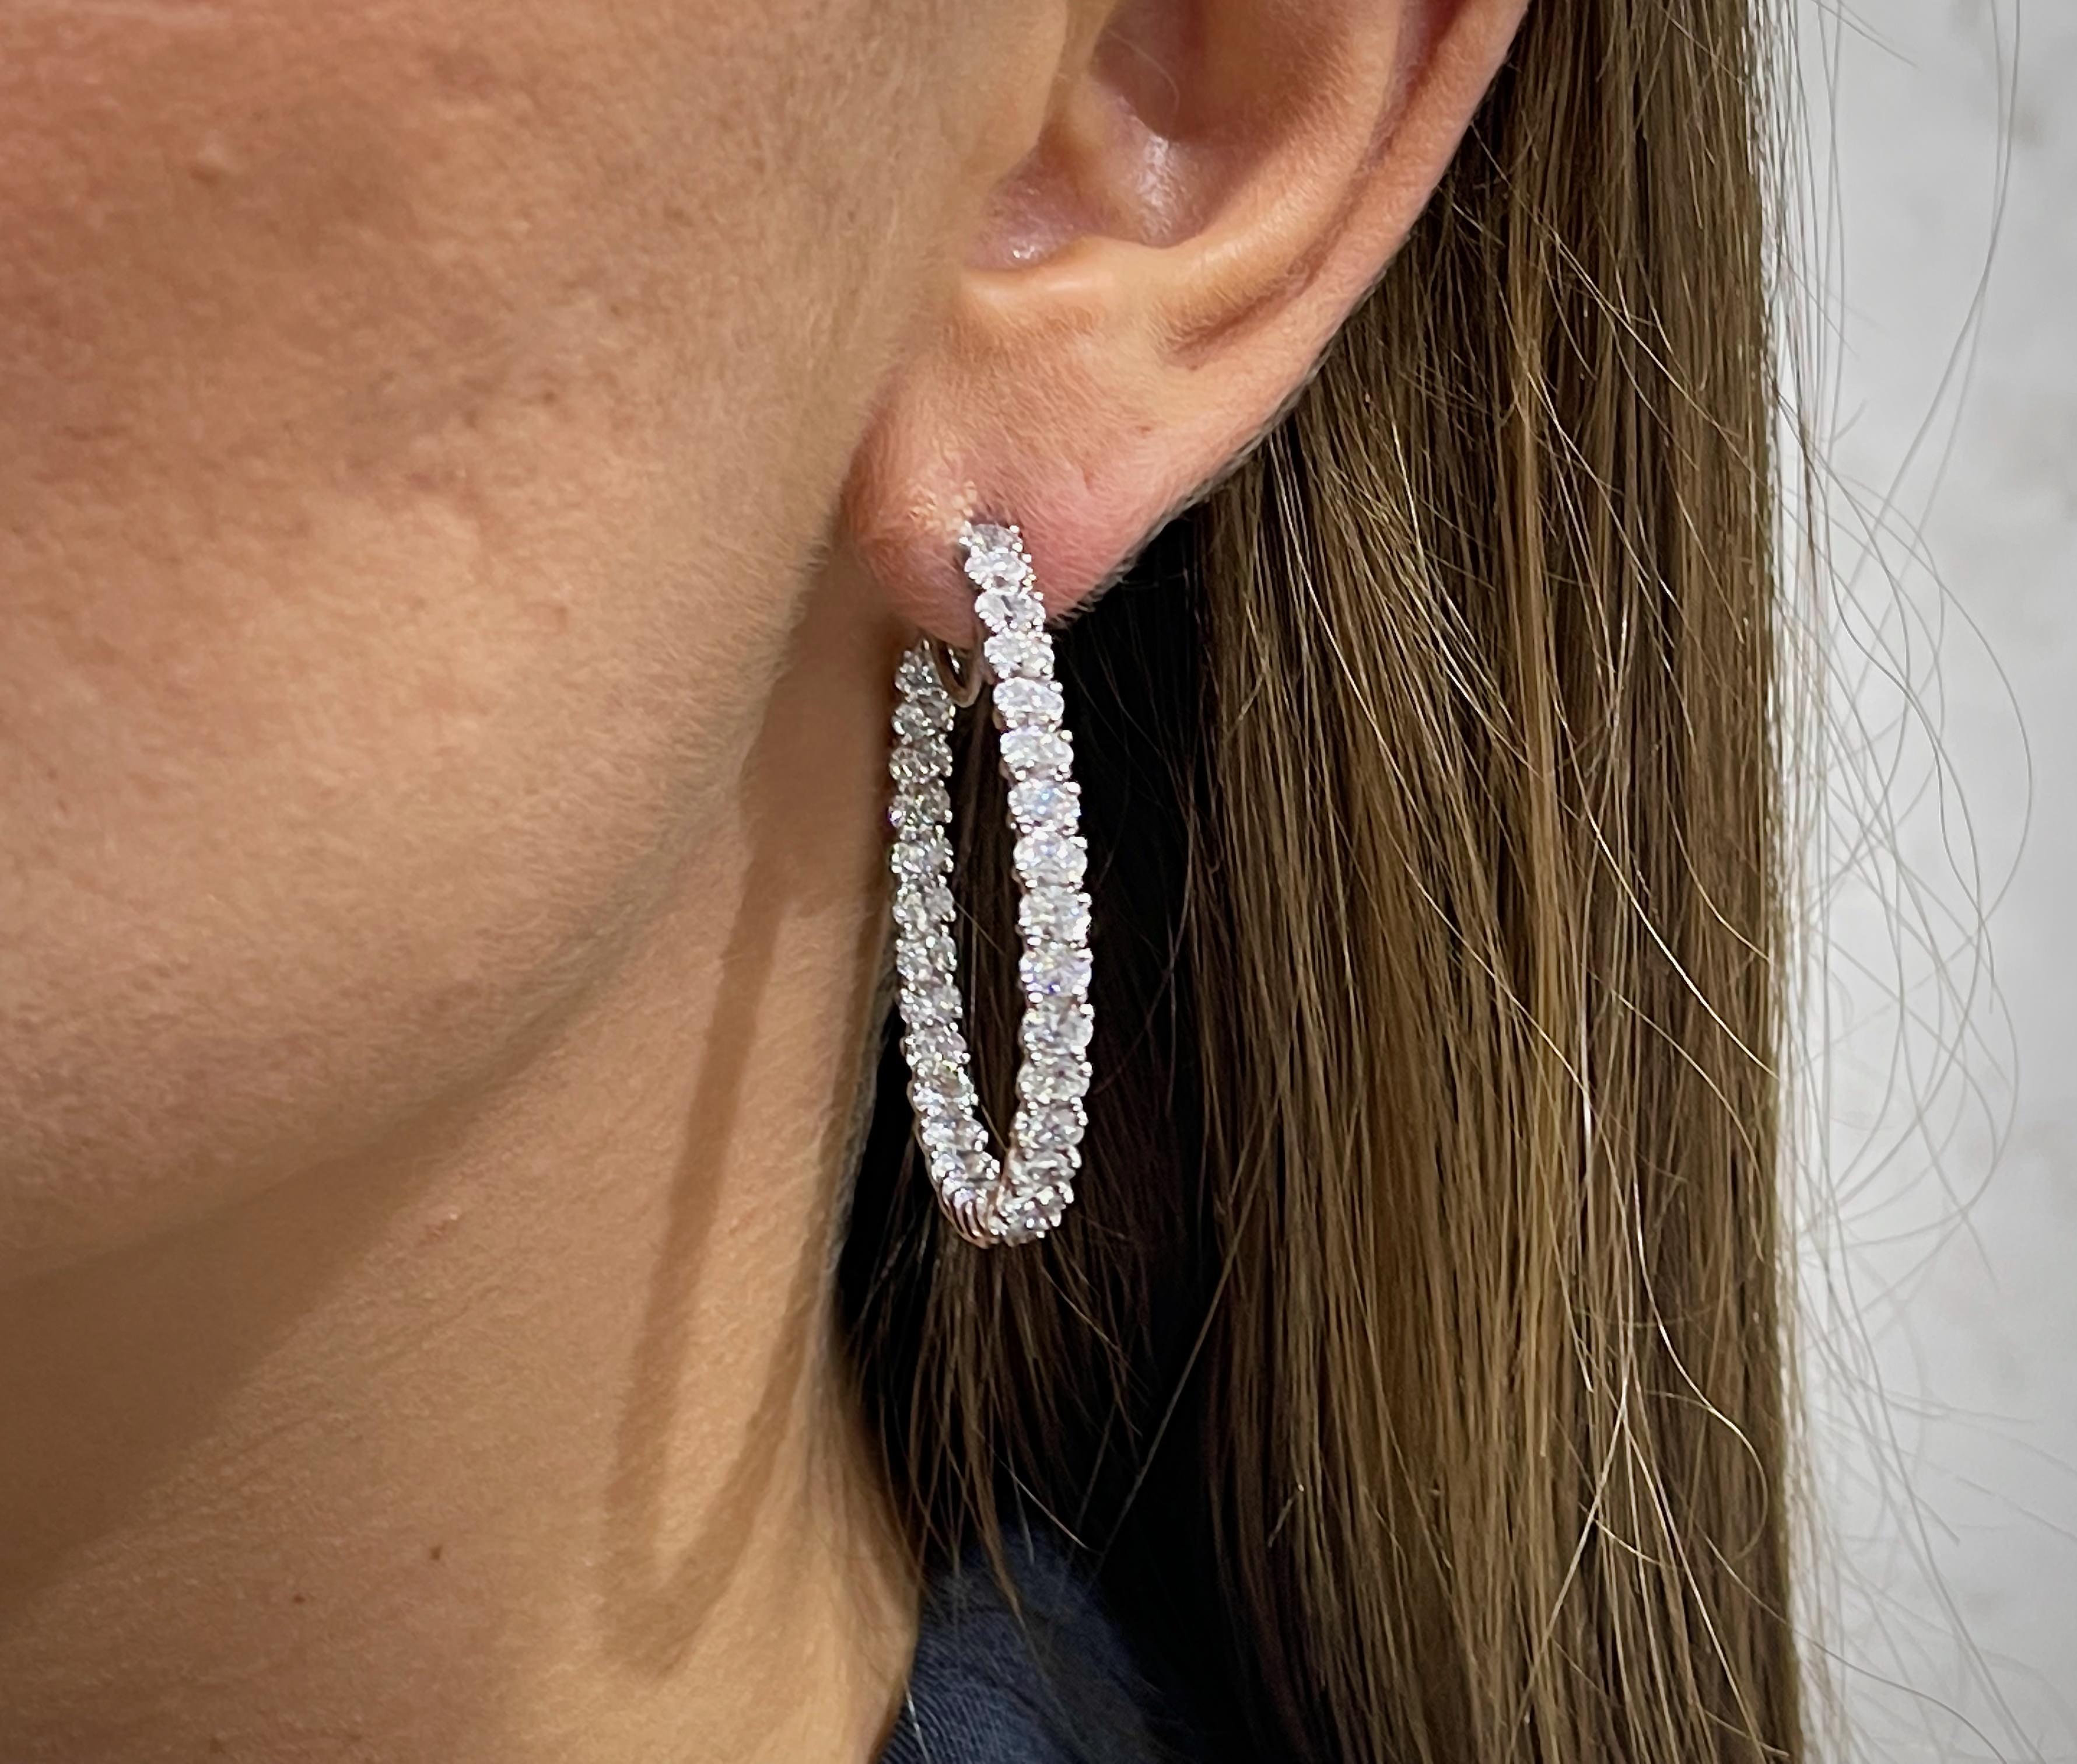 Beautiful Diamond Hoop Earrings Set With 64 Oval Cut Diamonds. It comes with an appraisal by GIA G.G.
Total Carat Weight is 9.33 Carats
Diamonds Color is F-G
Diamonds Clarity is VVS-VS
Metal is 18K White Gold